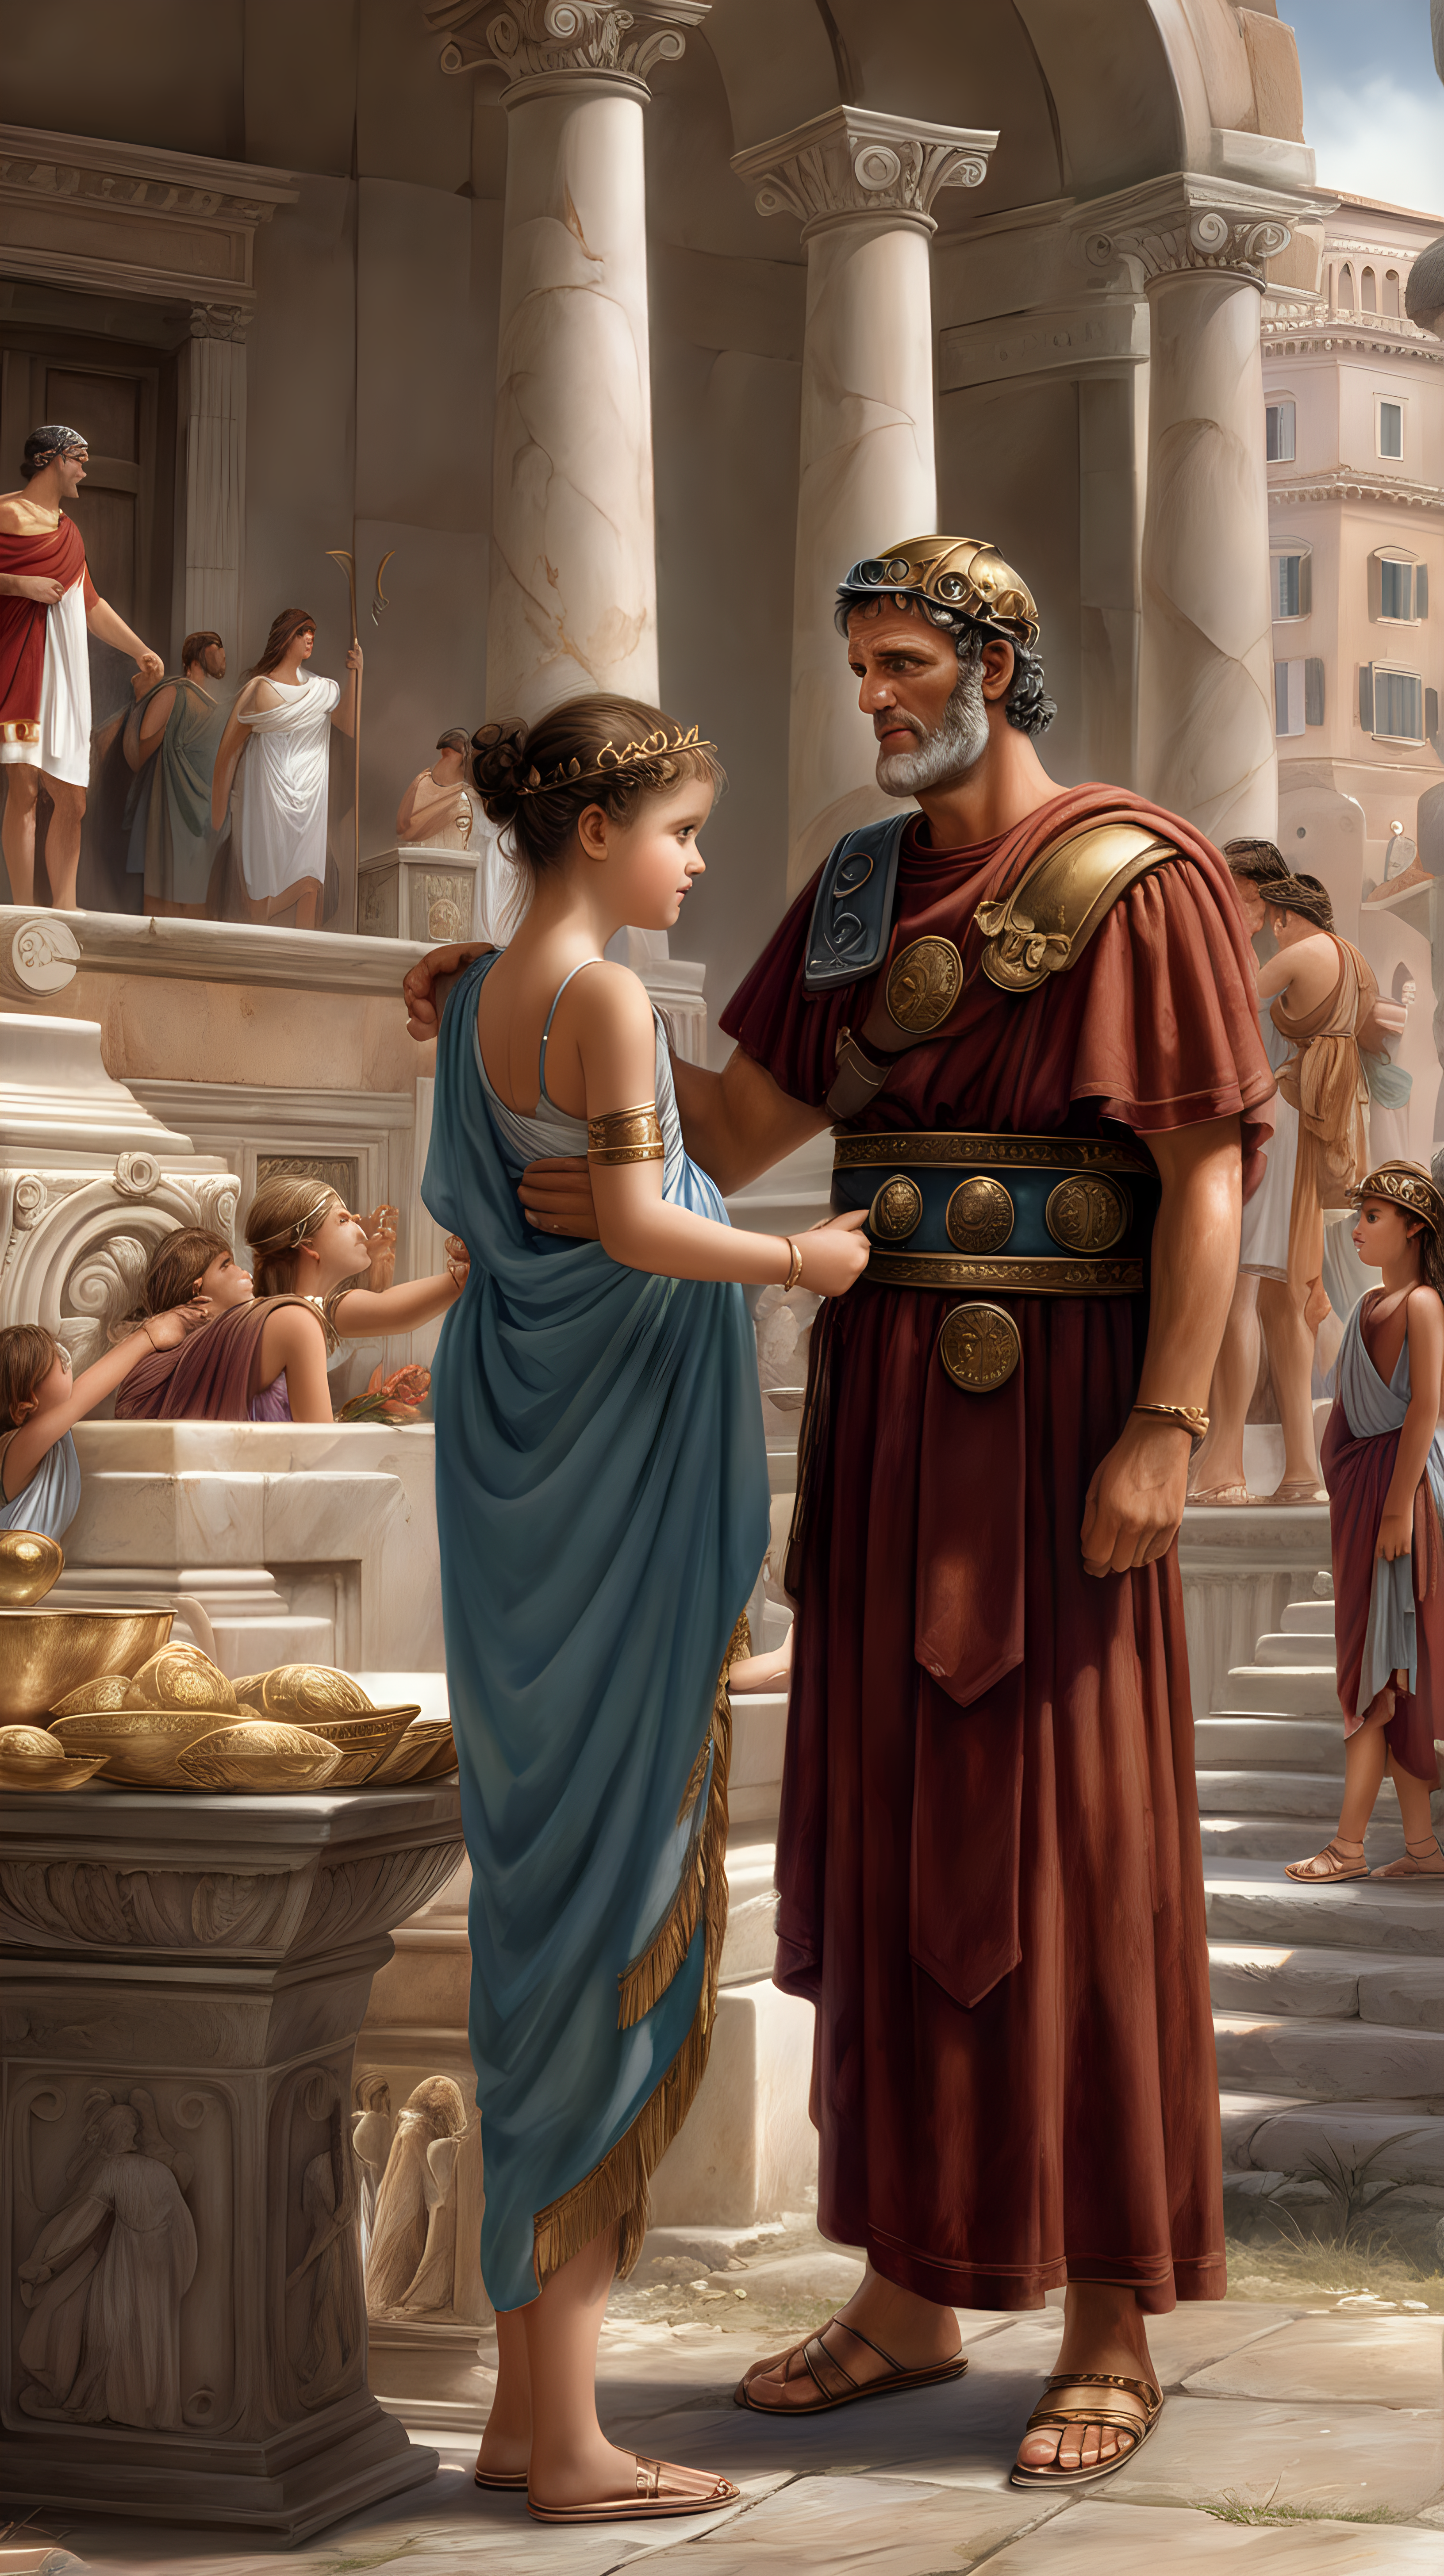 In ancient Rome a father sells his daughter